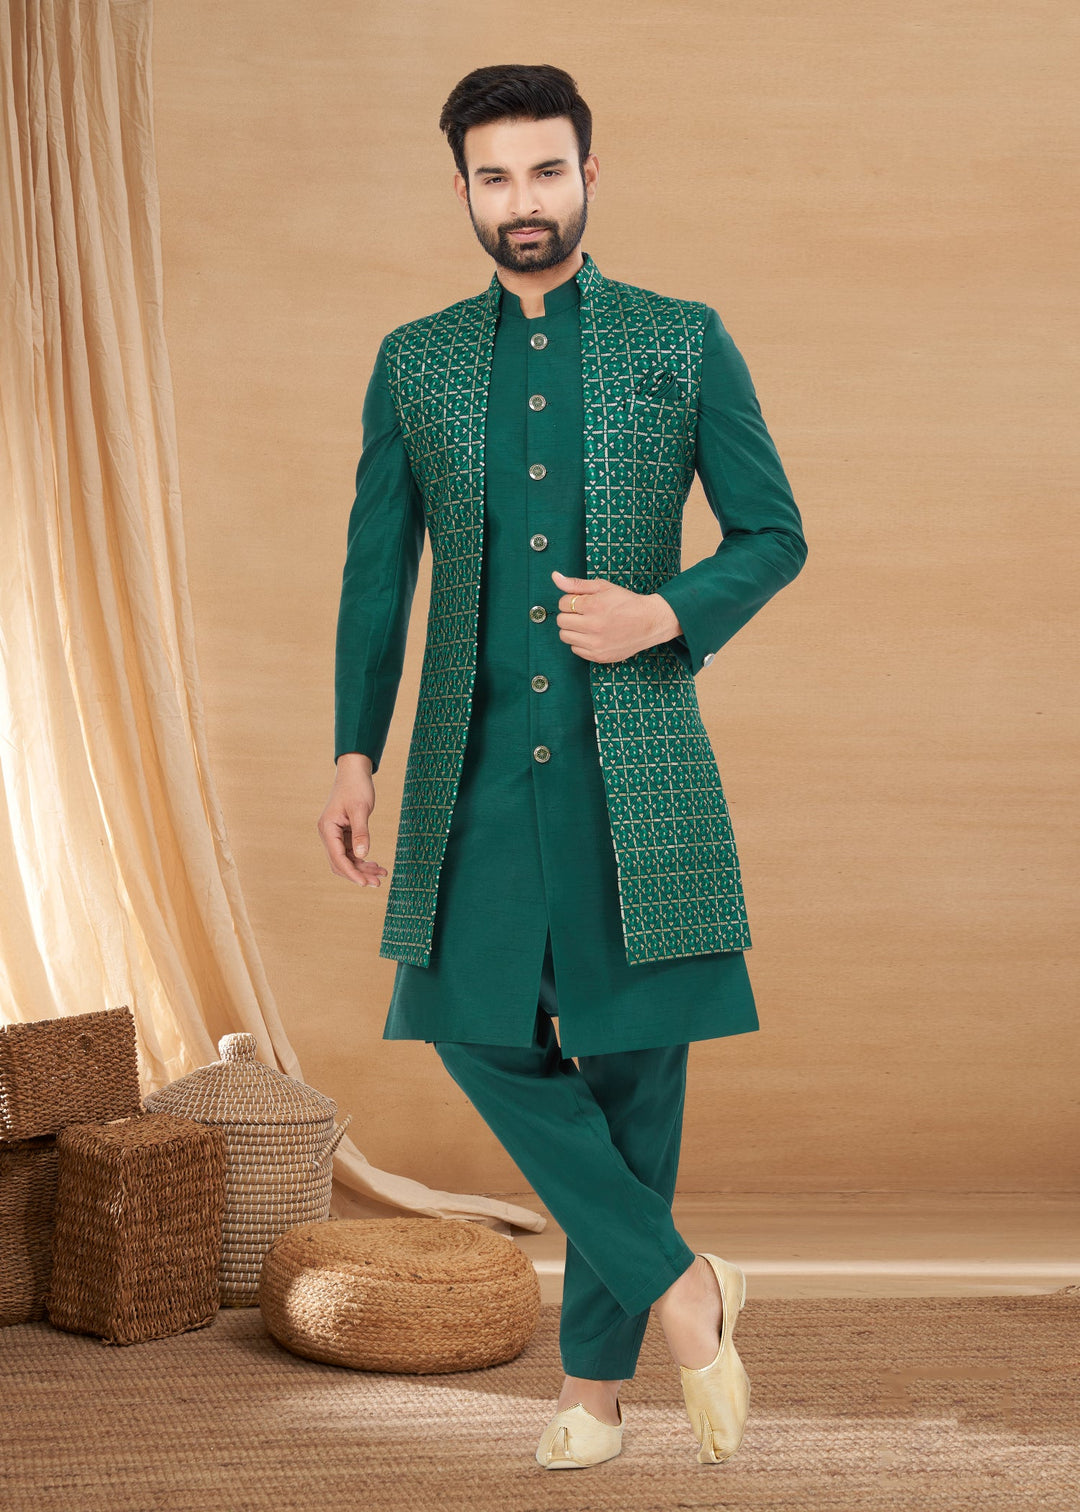 Green Indo Western Sherwani with Exquisite Embroidery for Weddings & Parties